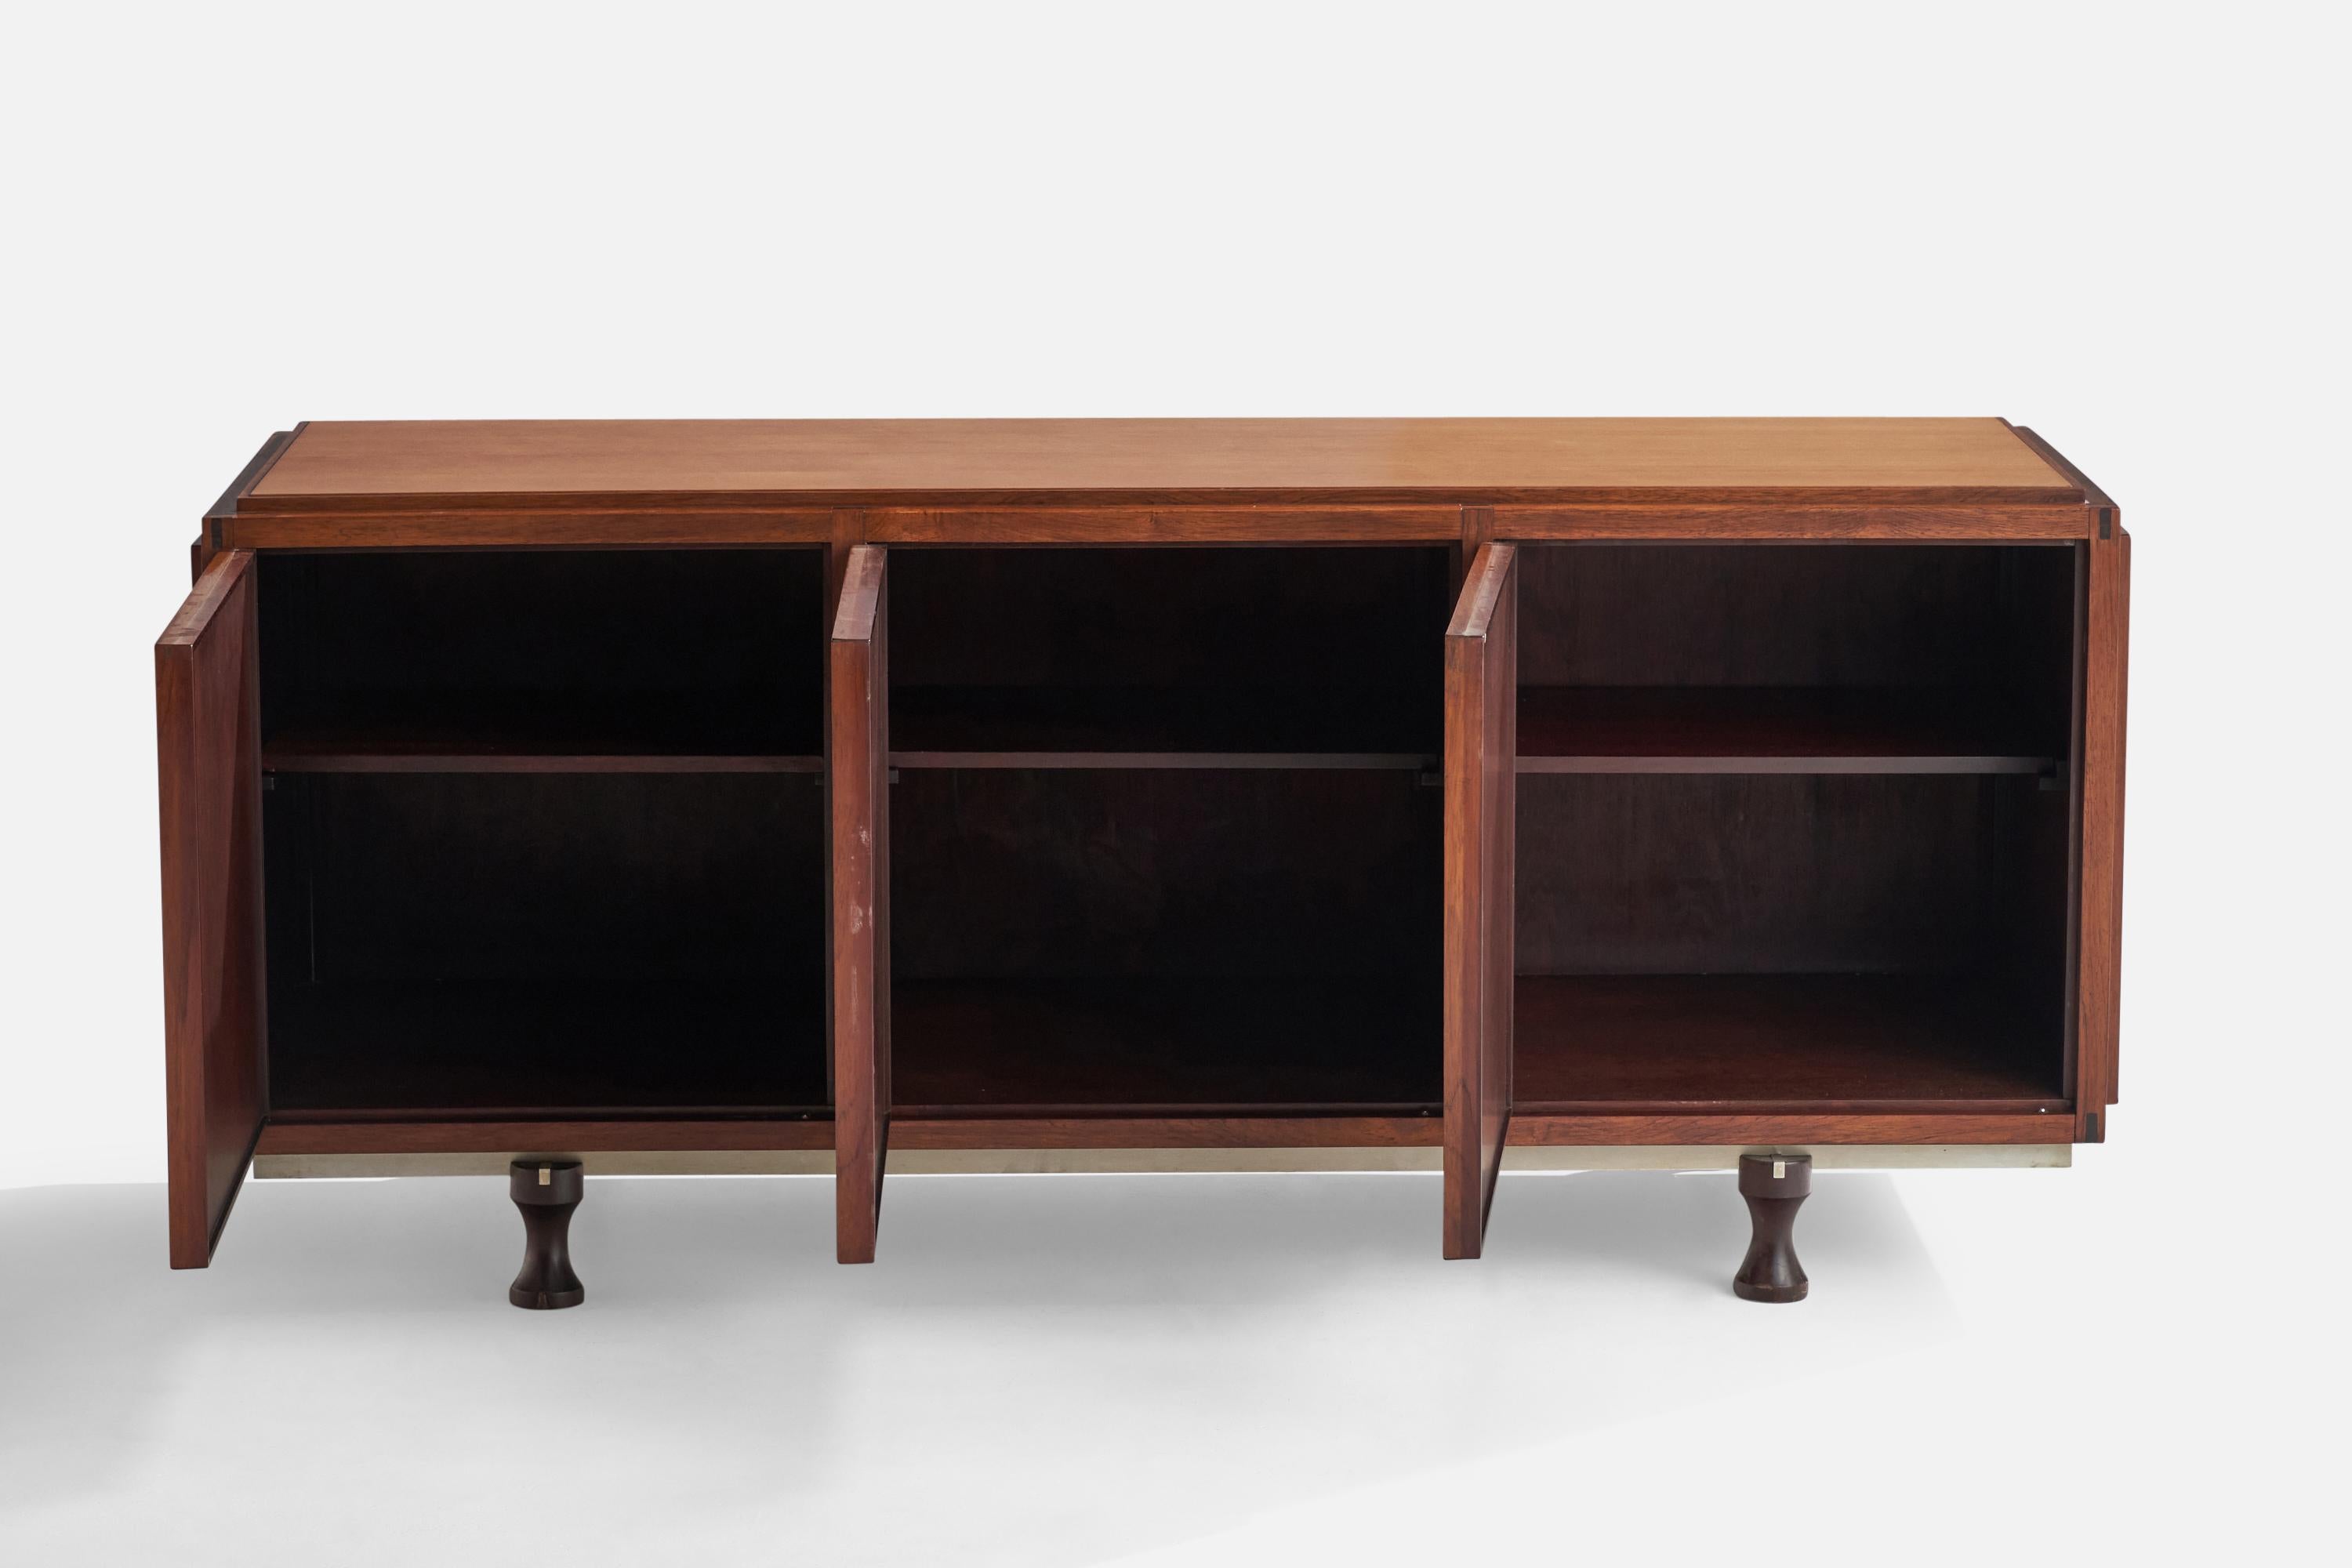 Gianfranco Frattini, Unique Sideboard, Rosewood, Leather, Steel, Italy, 1950s For Sale 4